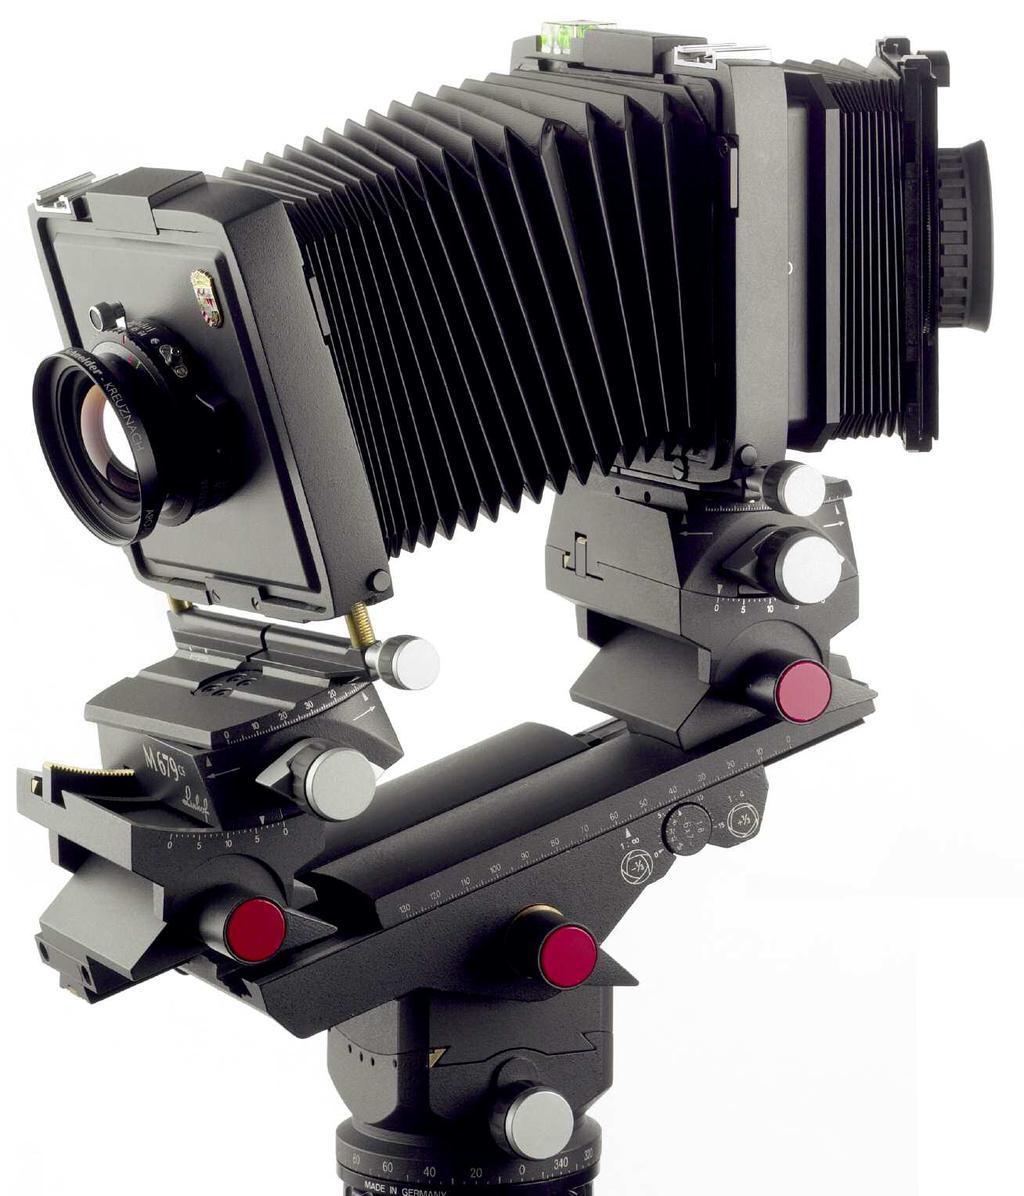 2. CAMERA DESIGN DETAILS AND ACCESSORIES The Linhof M 679cs is a system camera with an utmost flexibility of the individual system components. The basic idea is an optimum operation ease.